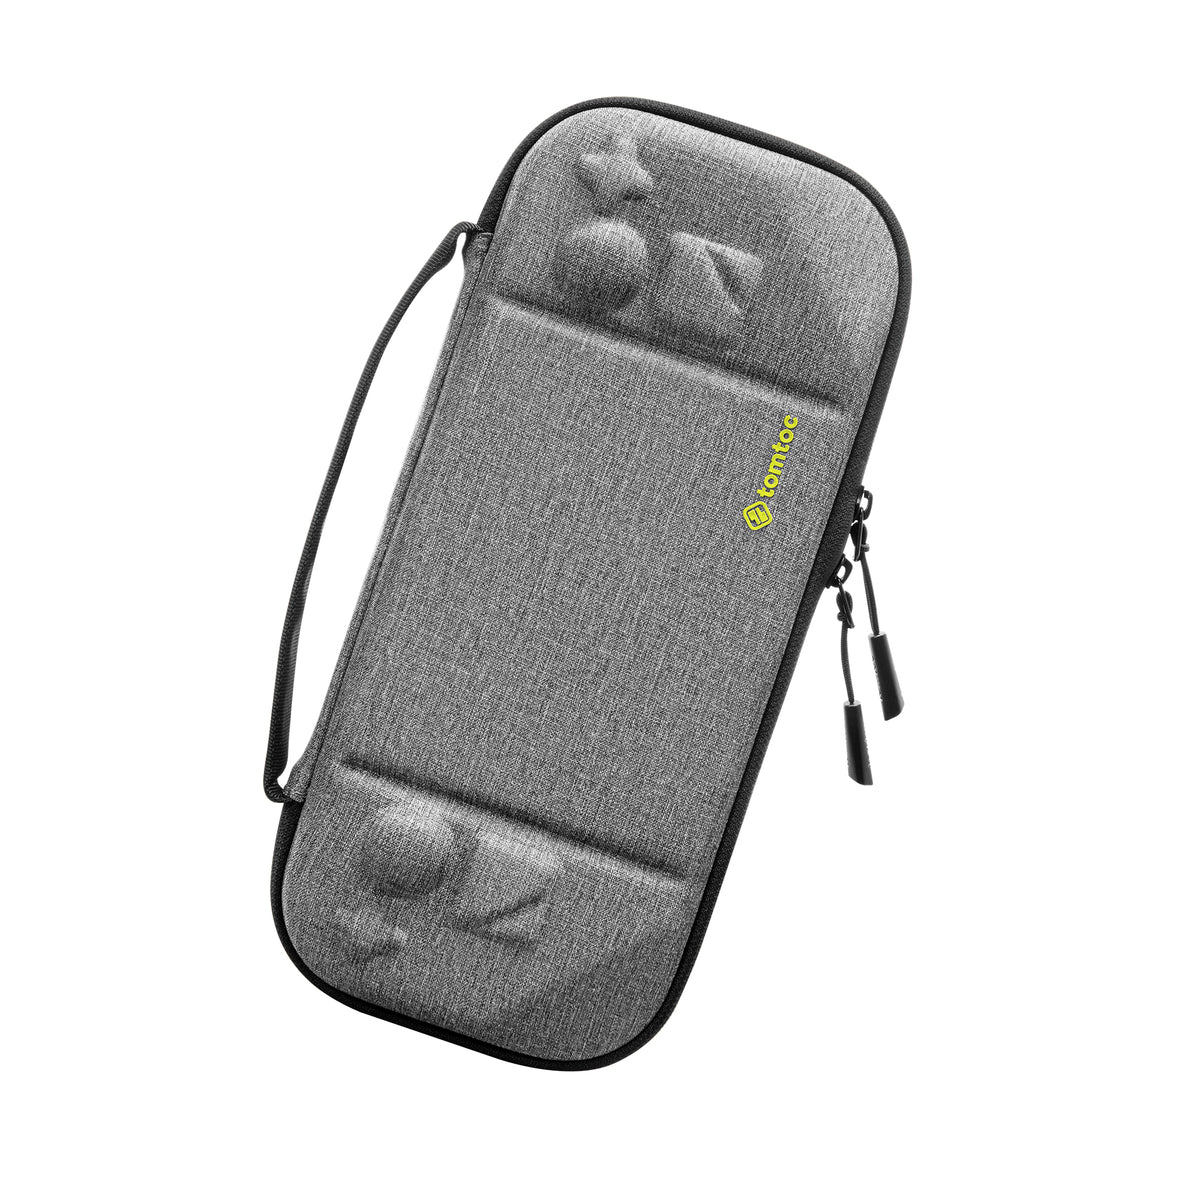 tomtoc Steam Deck Carrying Case / Protective Case / Hard Portable Travel Carrying Bag - Gray